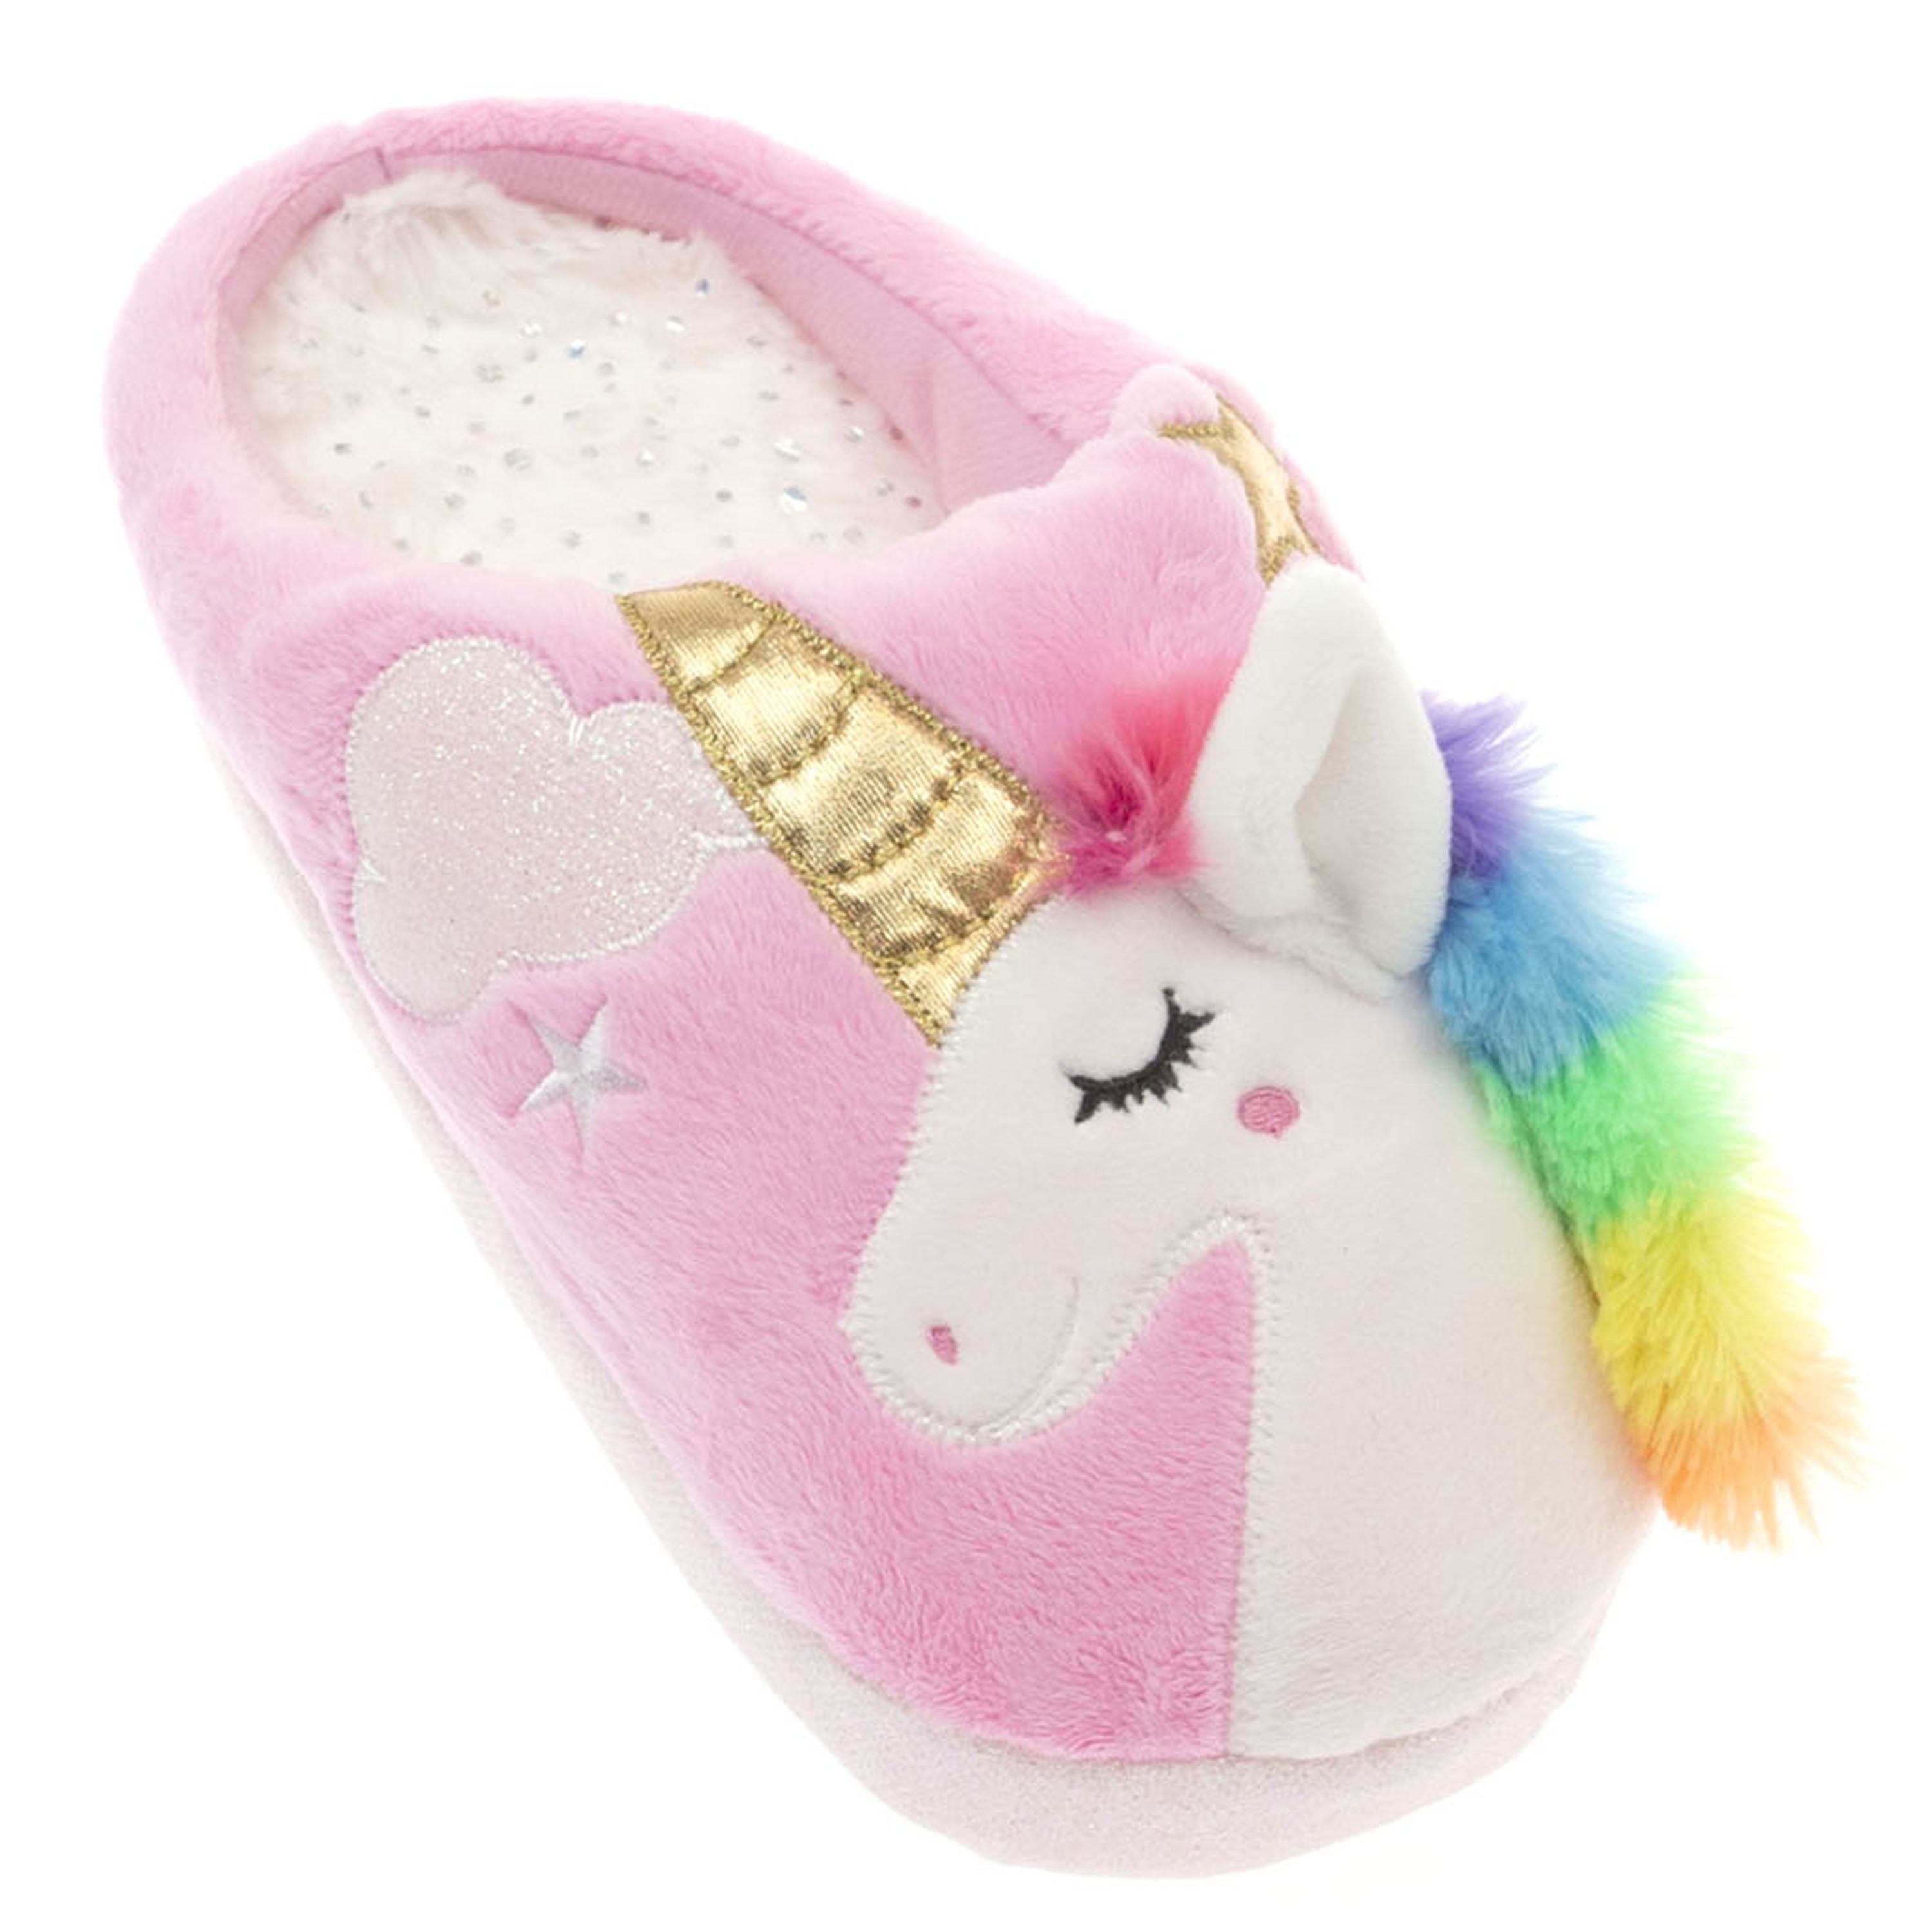 kids space slippers